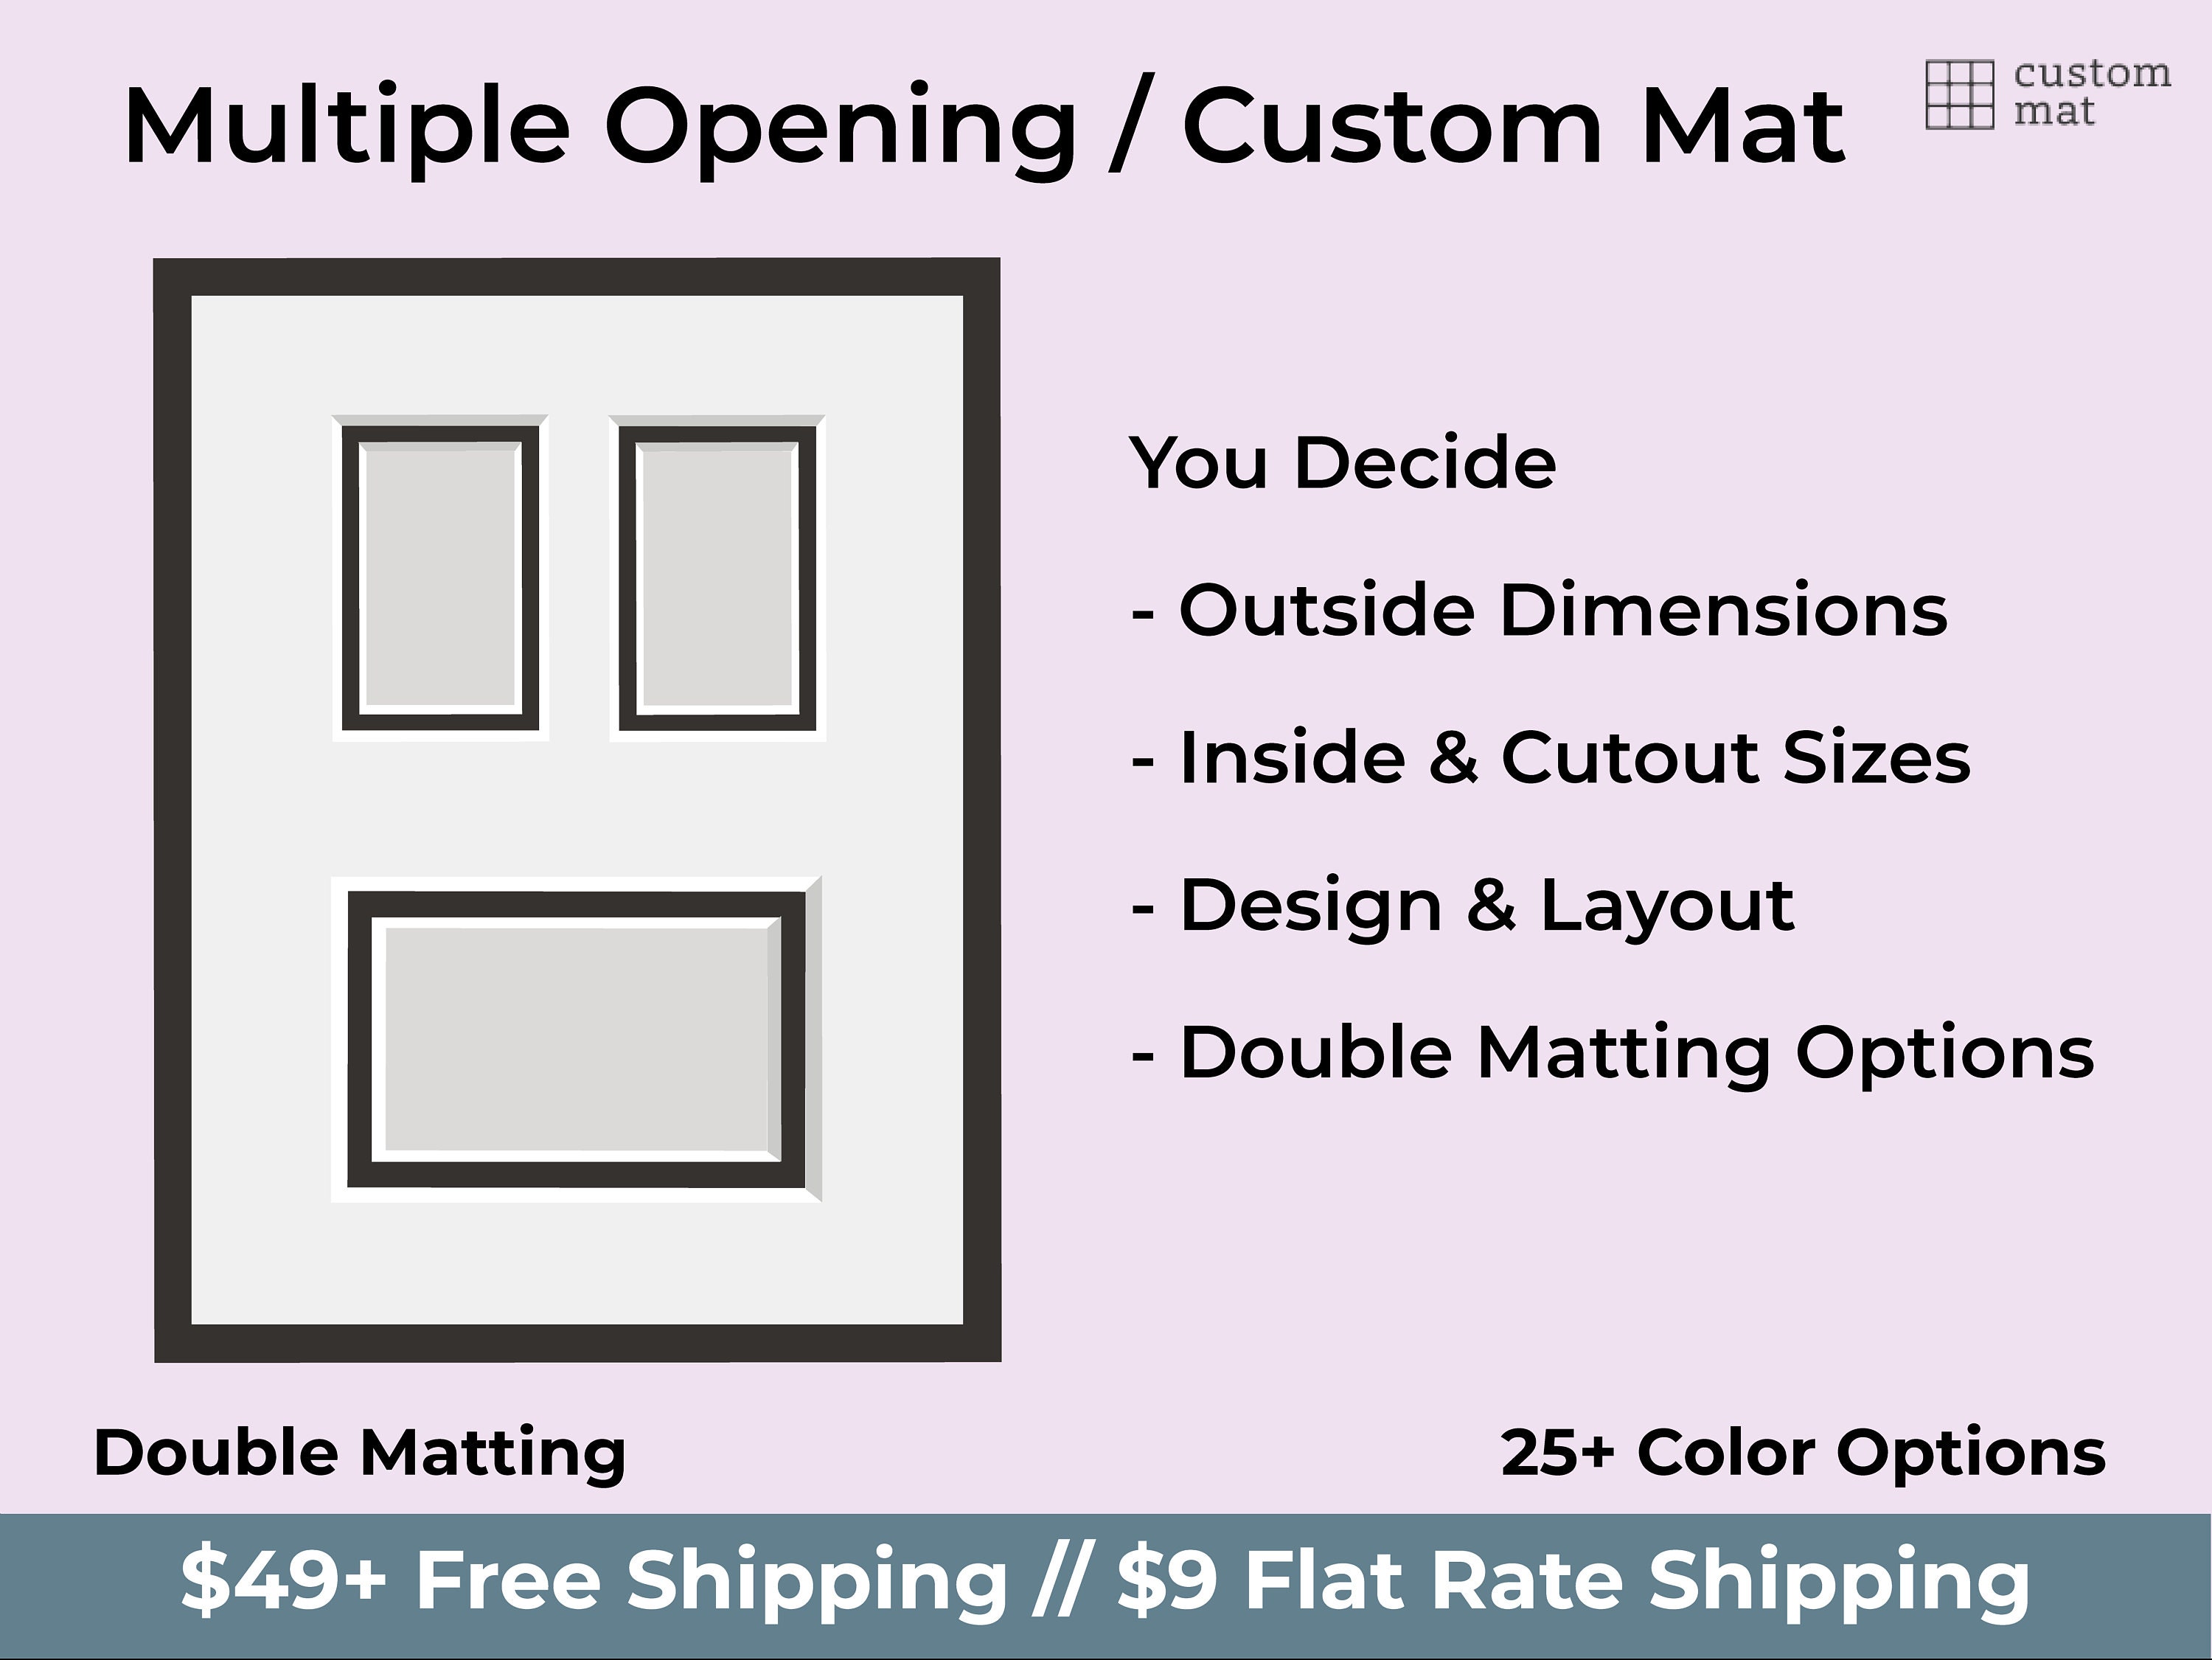 Single Mats - Non Standard Image Sizes - Picture Mat Sizes - Custom to Size  - Odd Sizes - Square Mats